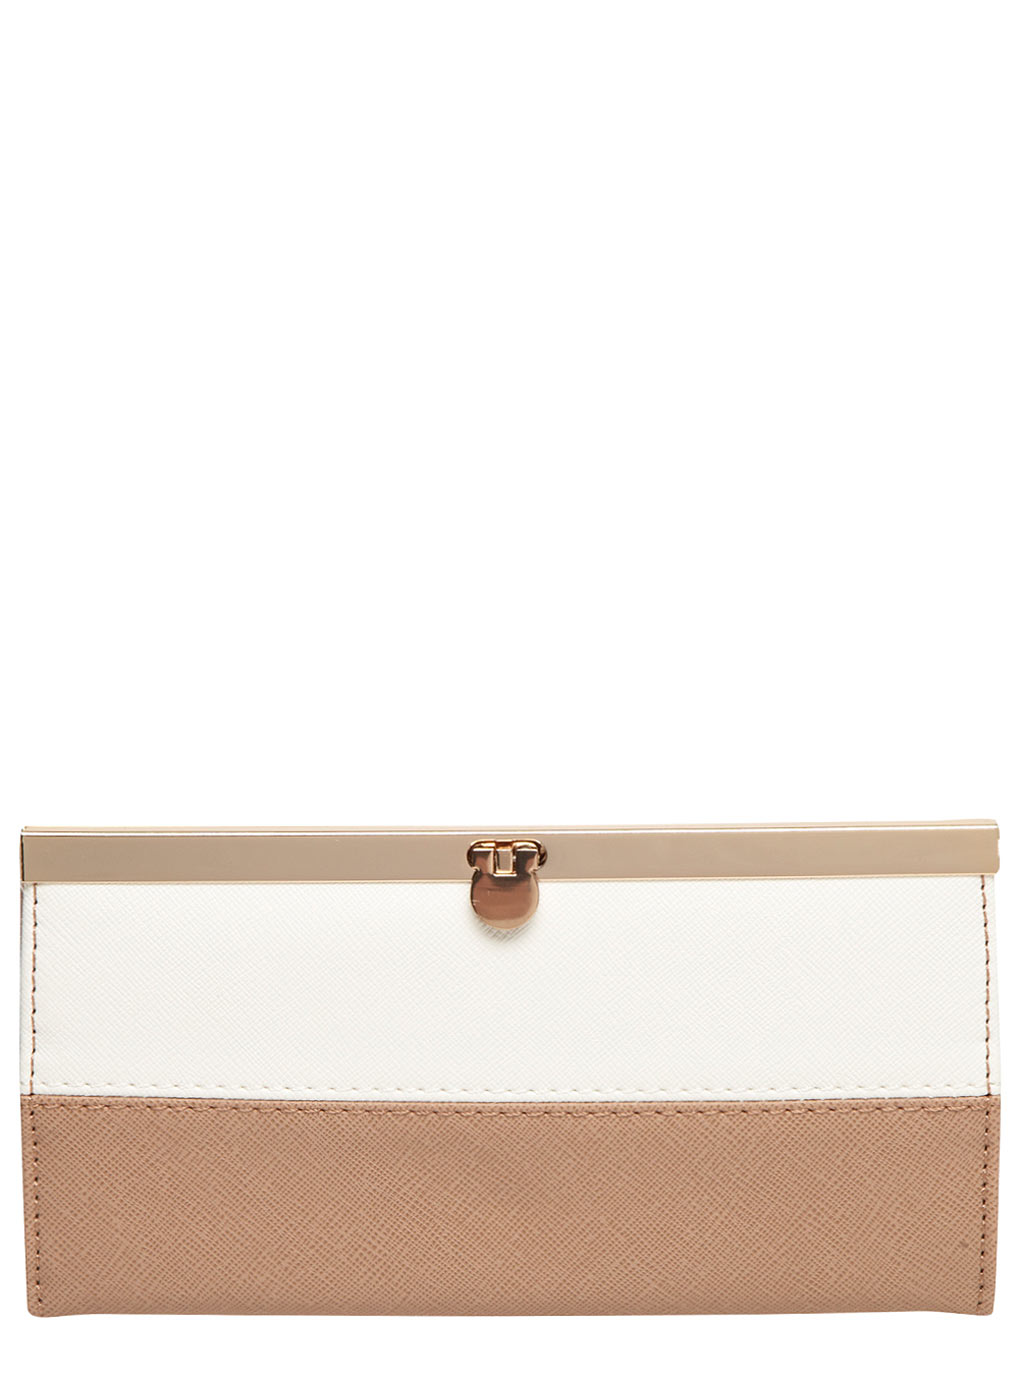 Dorothy Perkins White and camel bar top purse 18344240